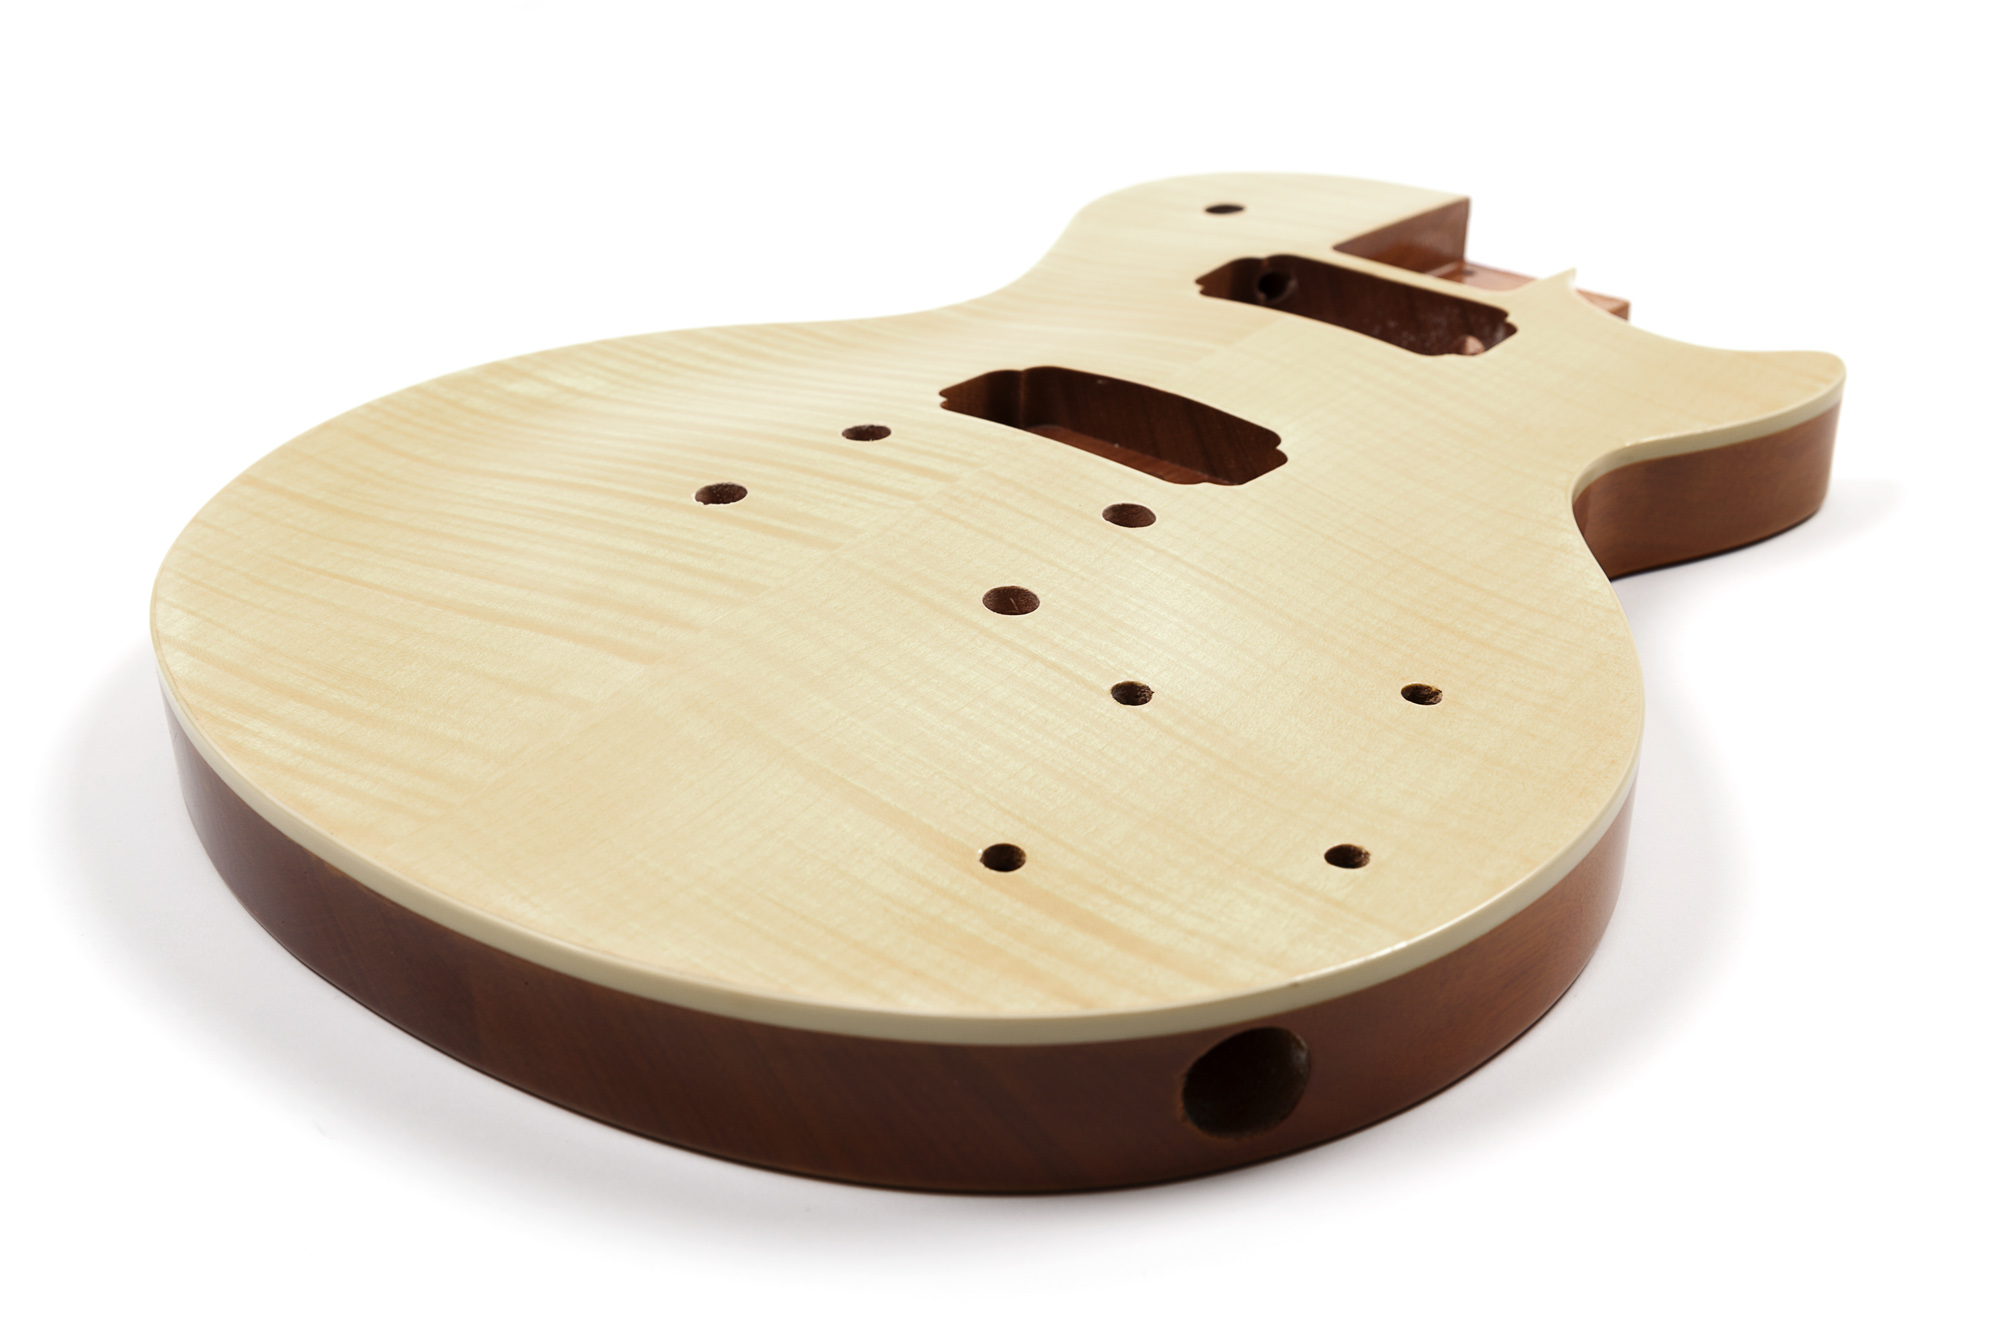 LP Electric Guitar Body Unfinished Mahogany One Piece Wood Made Set In ...